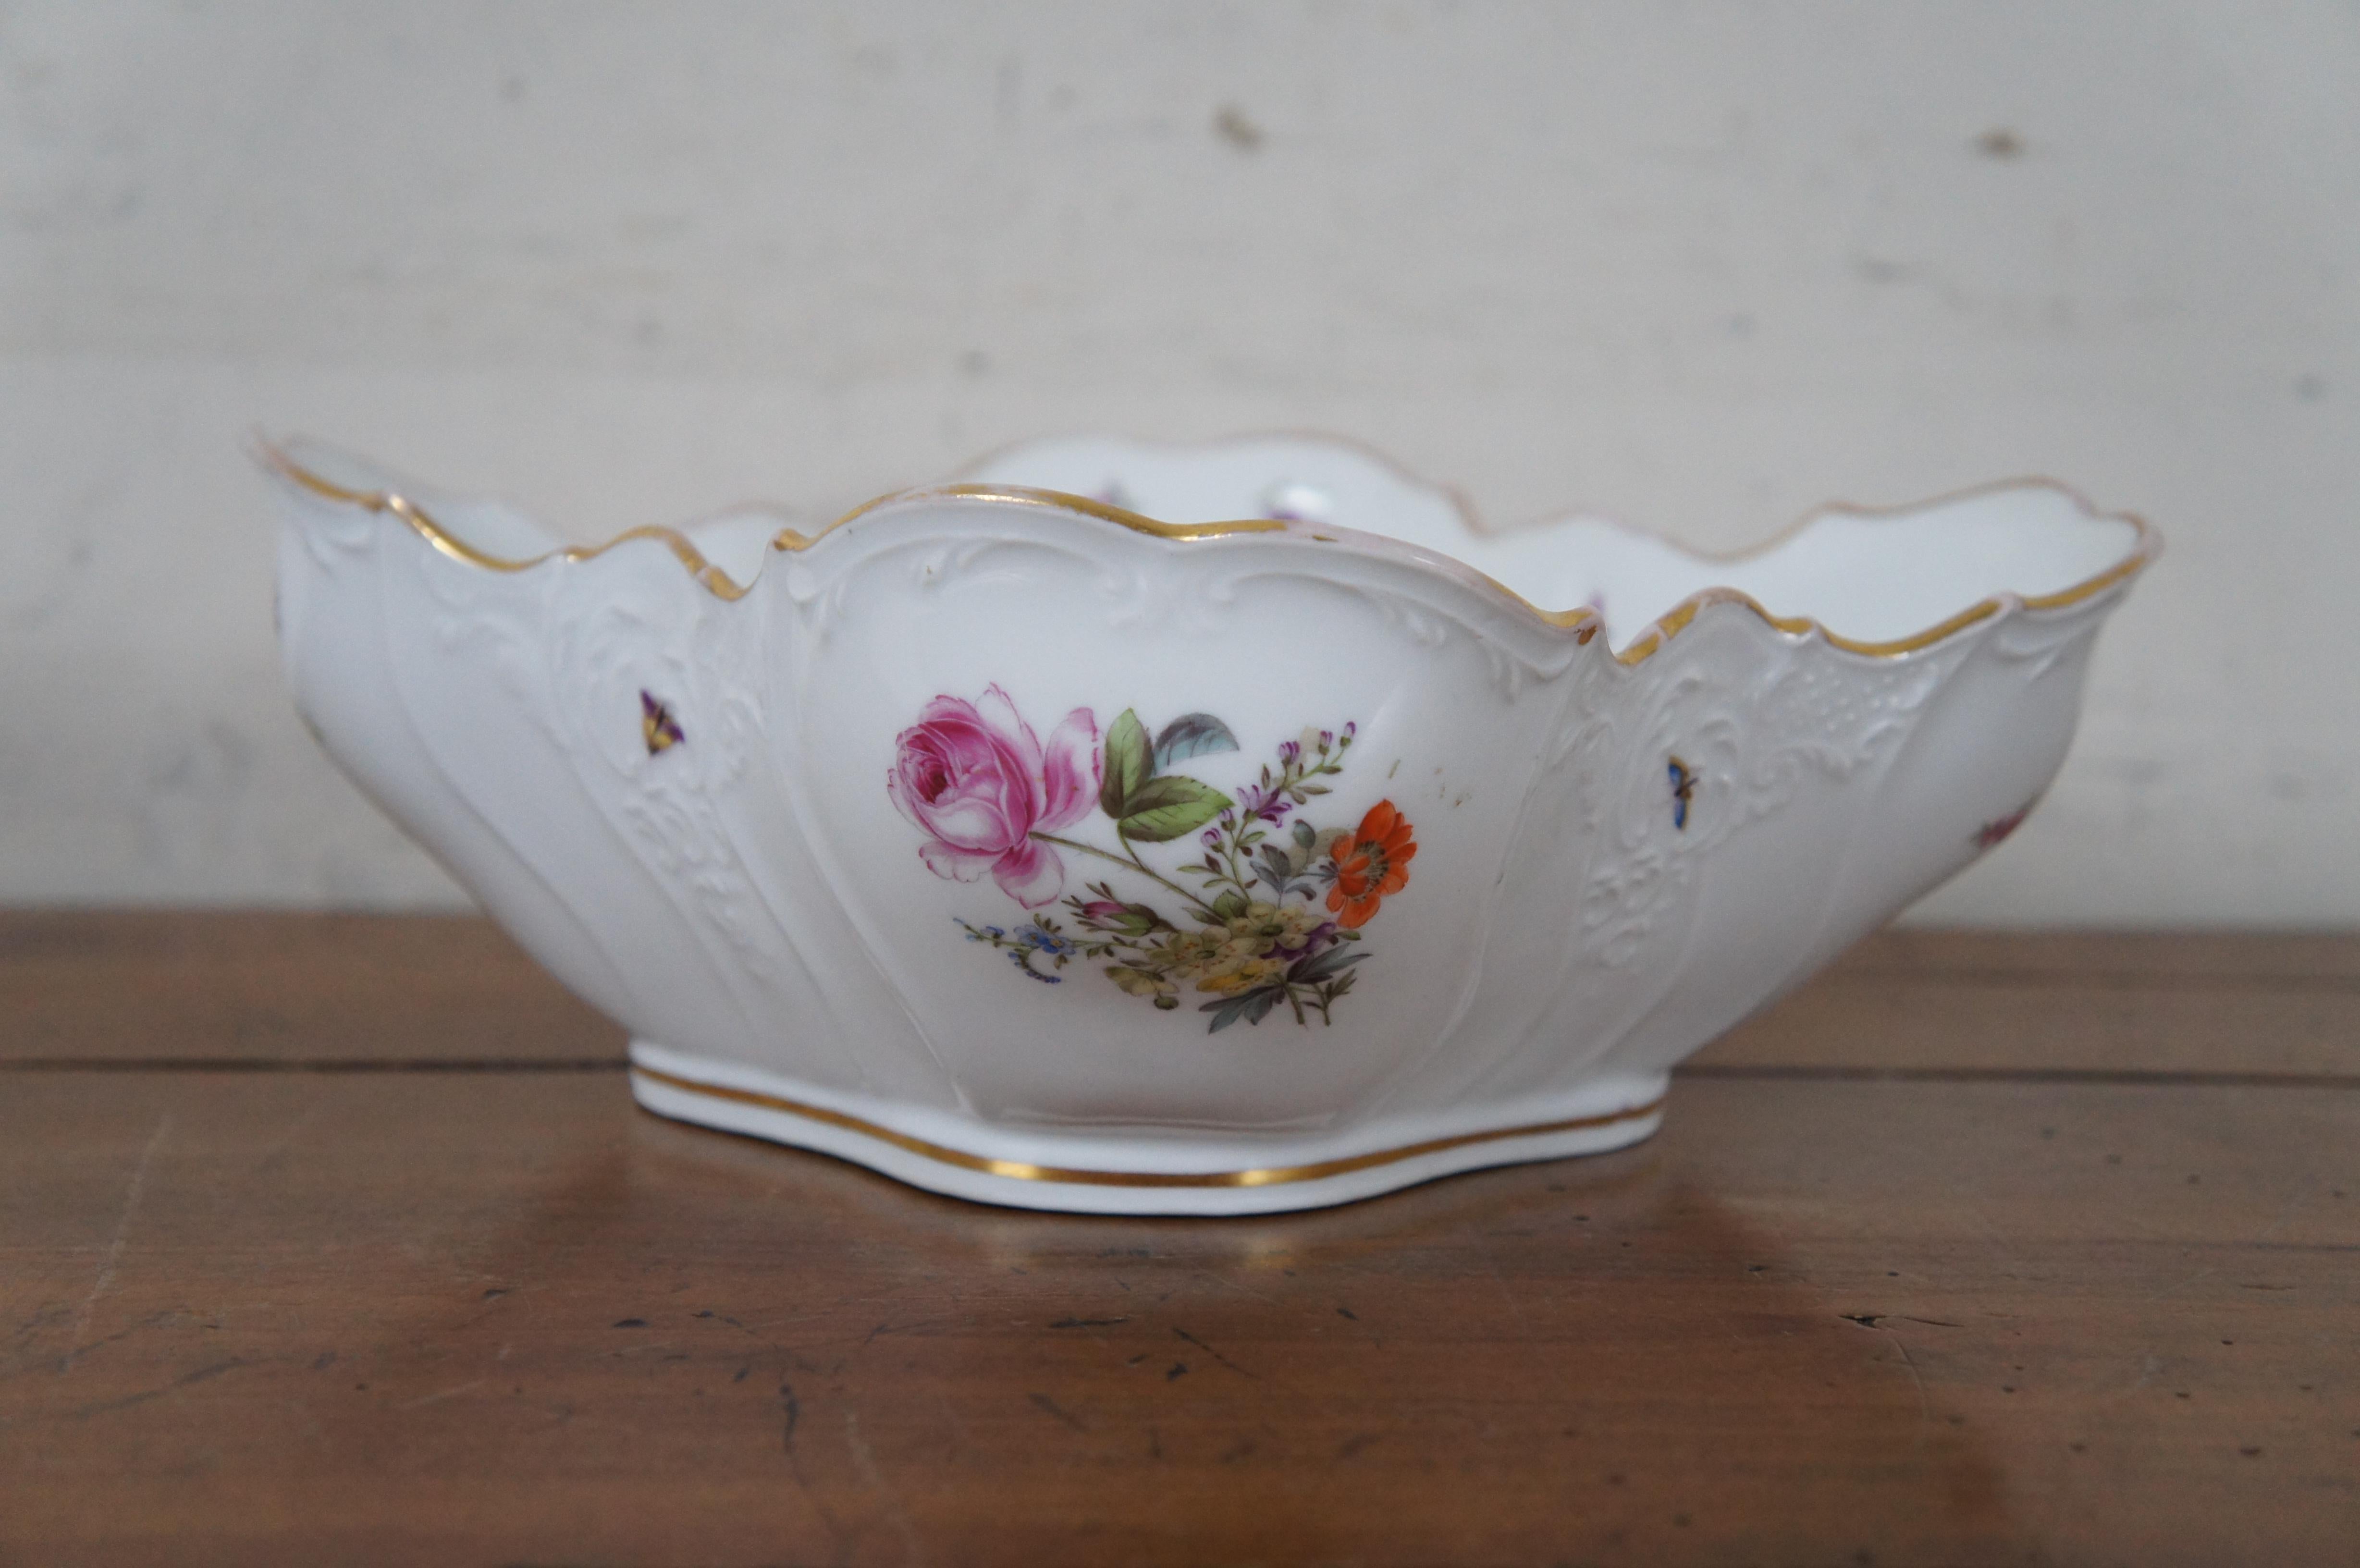 Porcelain Antique German Dresden Ruffled Serpentine Floral Butterfly Bowl Compote 9